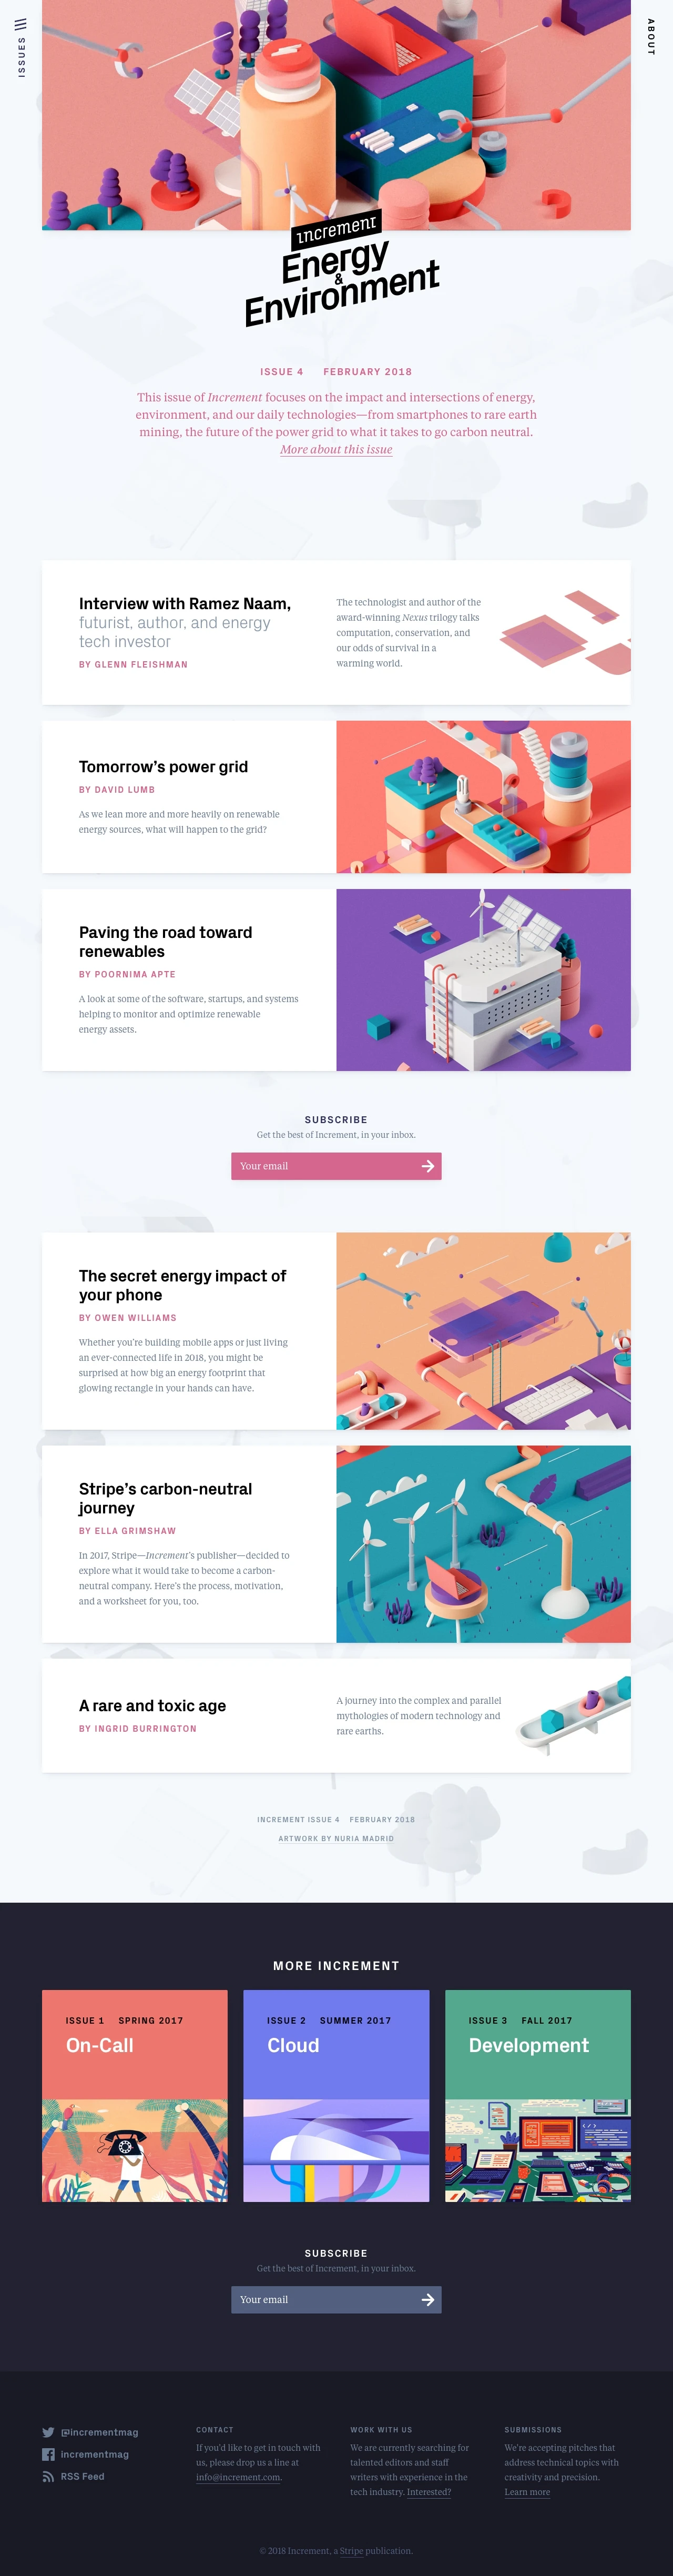 Increment Landing Page Example: This issue of Increment focuses on the impact and intersections of energy, environment, and our daily technologies—from smartphones to rare earth mining, the future of the power grid to what it takes to go carbon neutral.